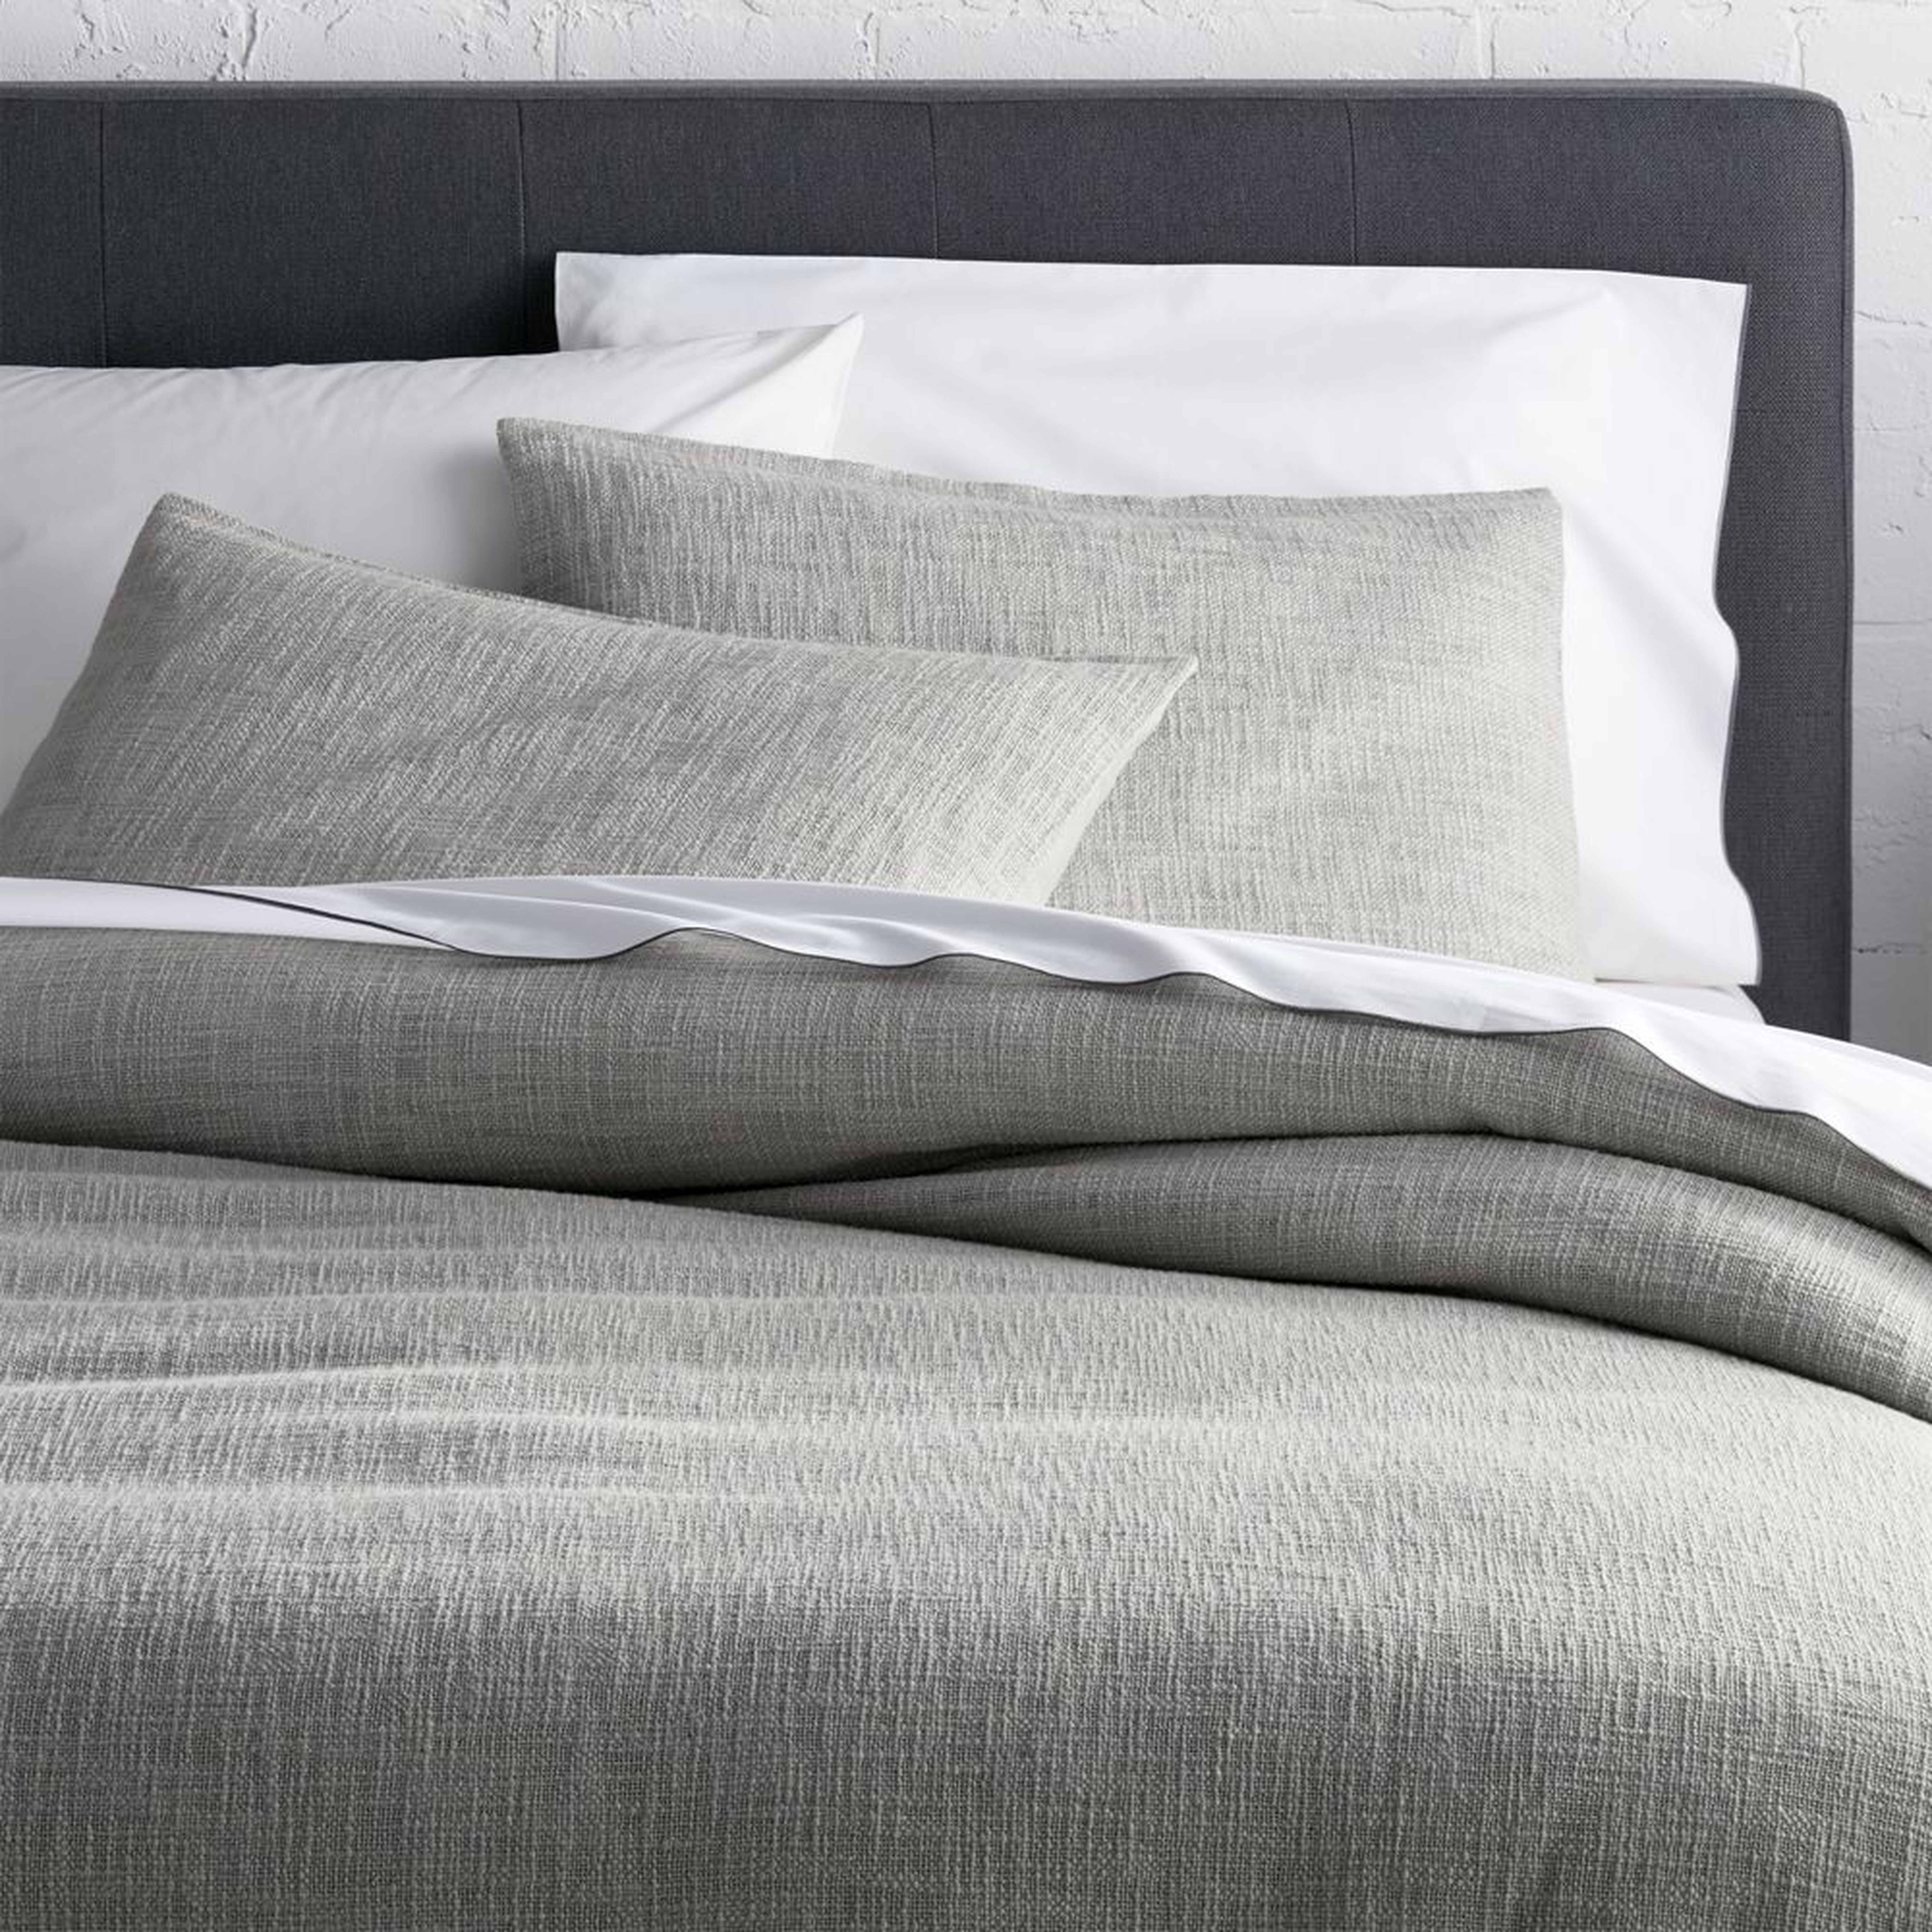 Lindstrom Duvet Cover, Gray, King - Crate and Barrel